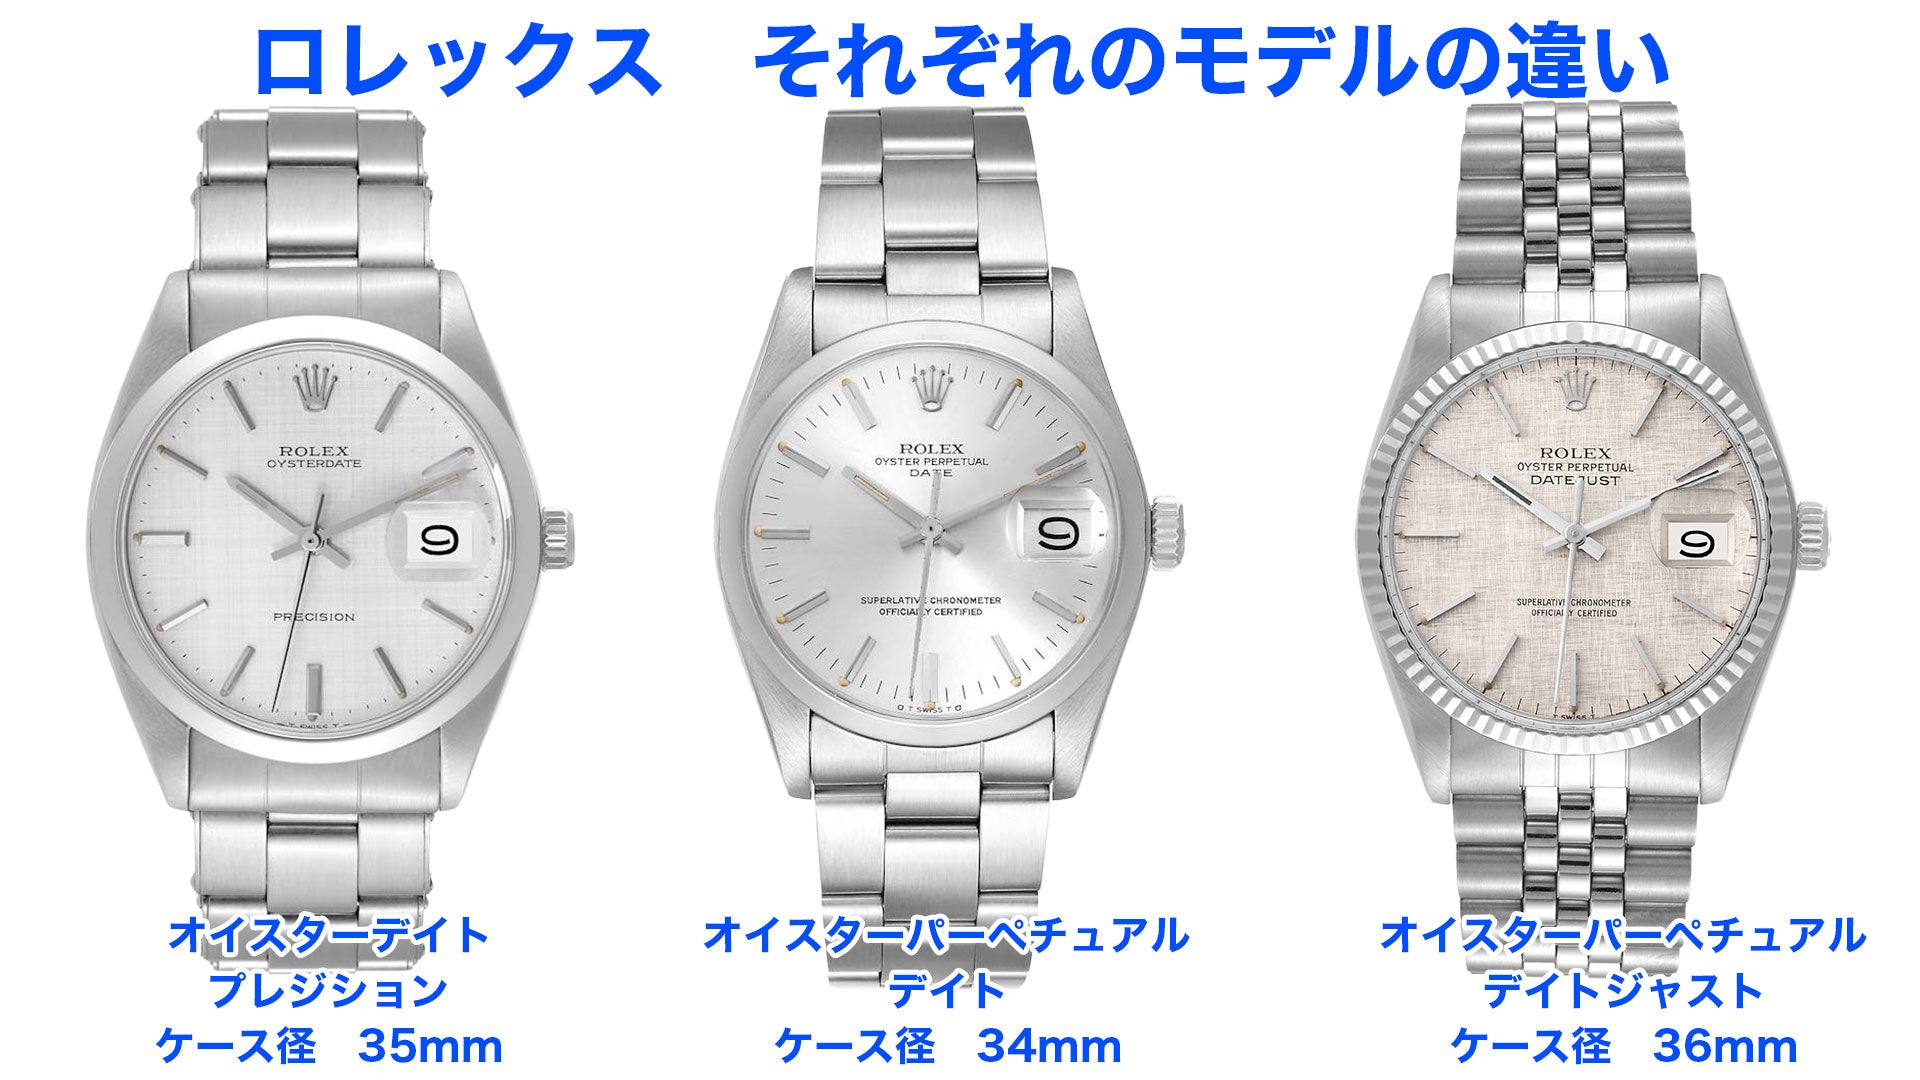 The difference between the Perpetual Date, Oyster Precision and Datejust